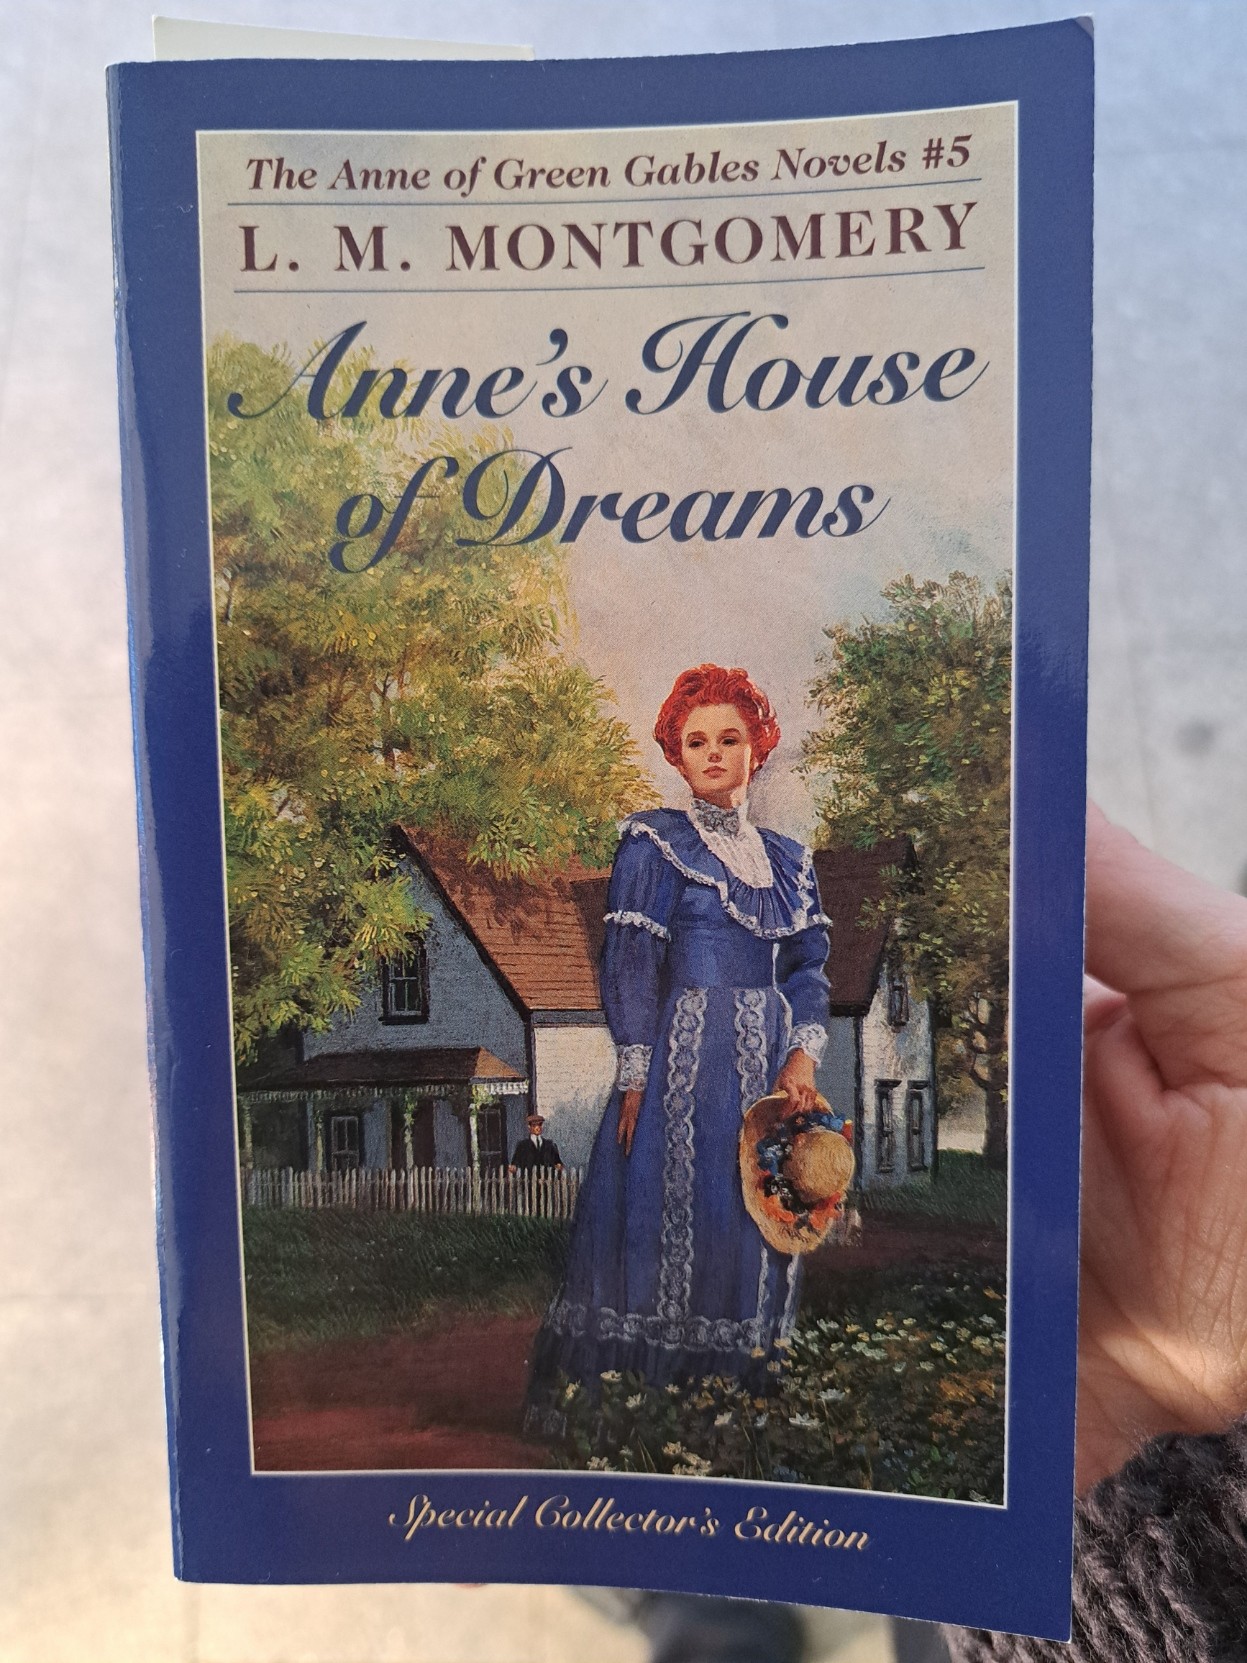 A picture of L. M. Montgomery's "Anne's House of Dreams"